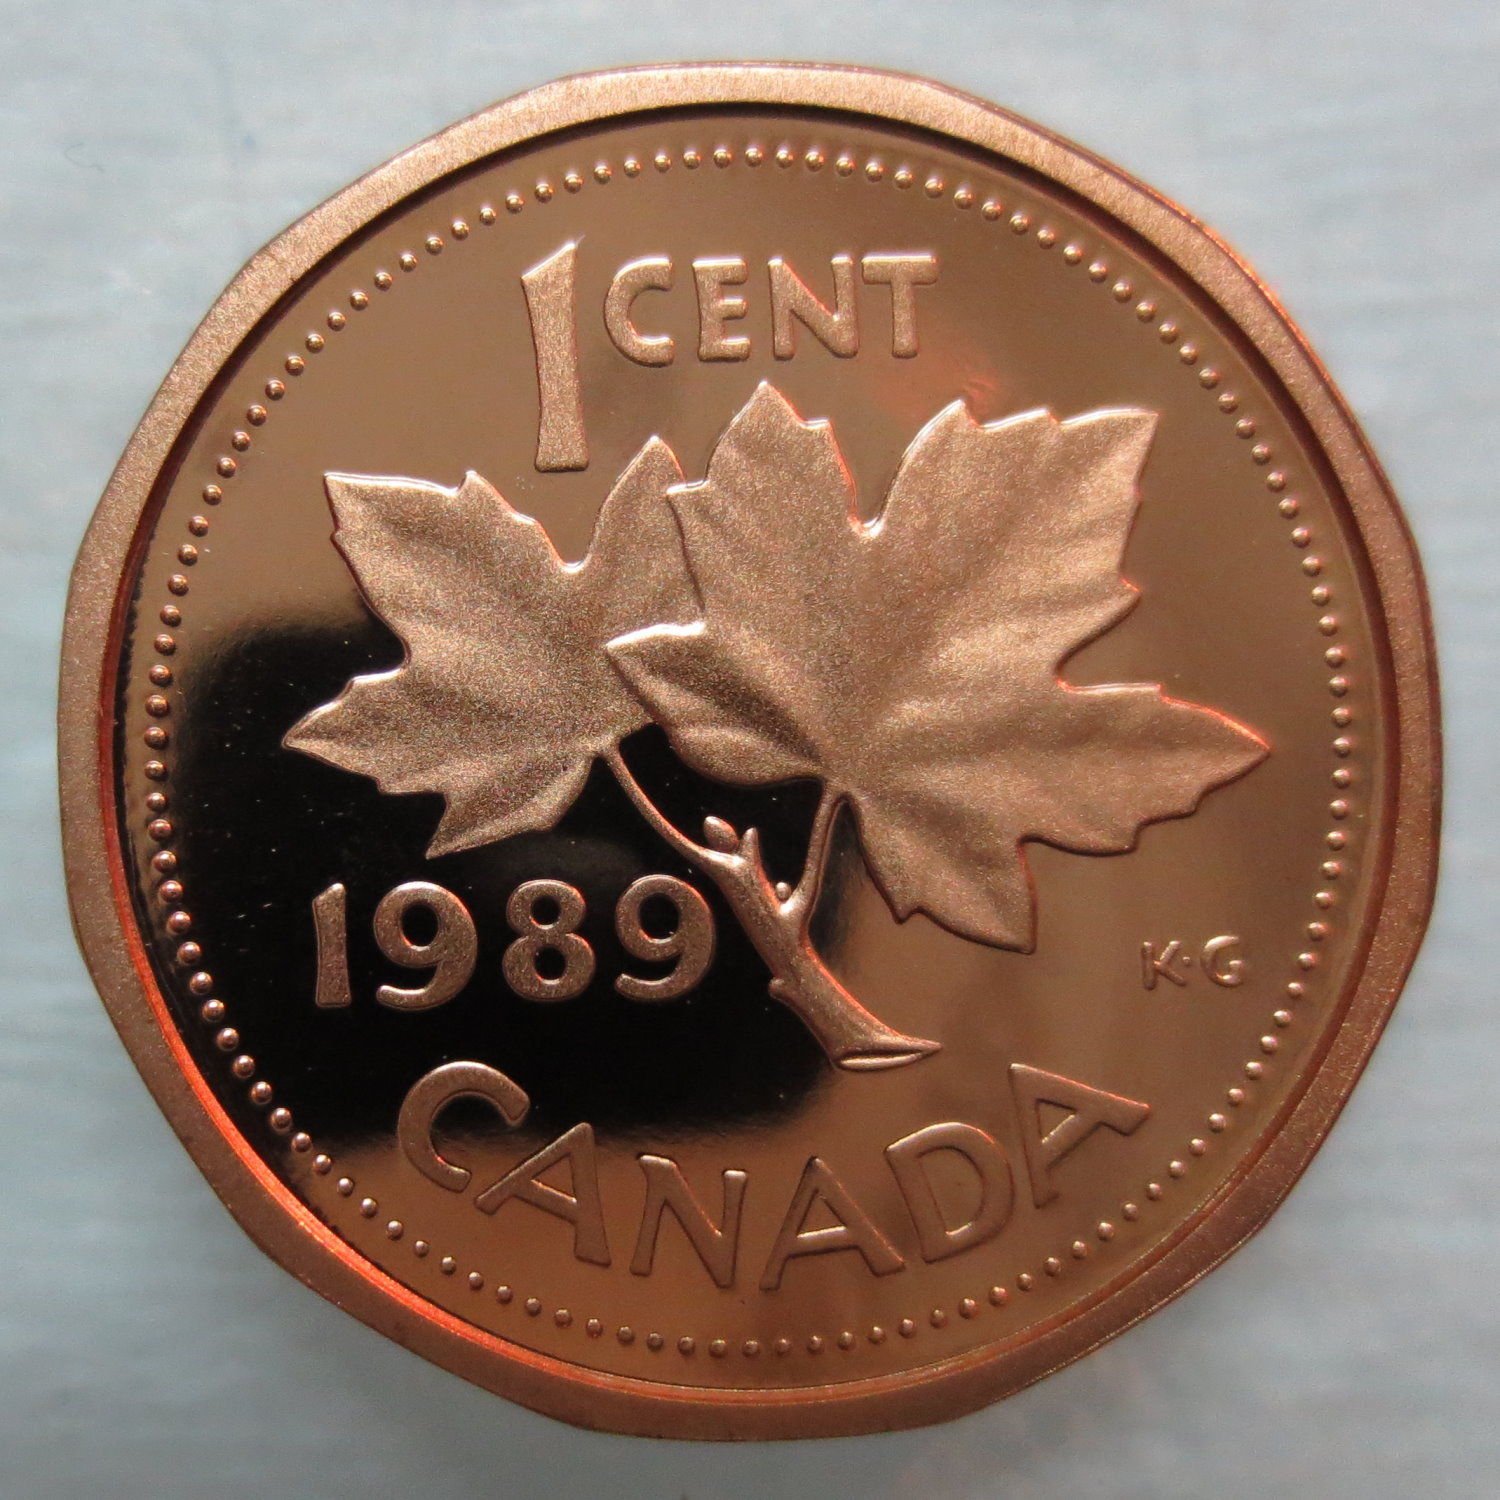 1989 CANADA 1 CENT PROOF PENNY COIN